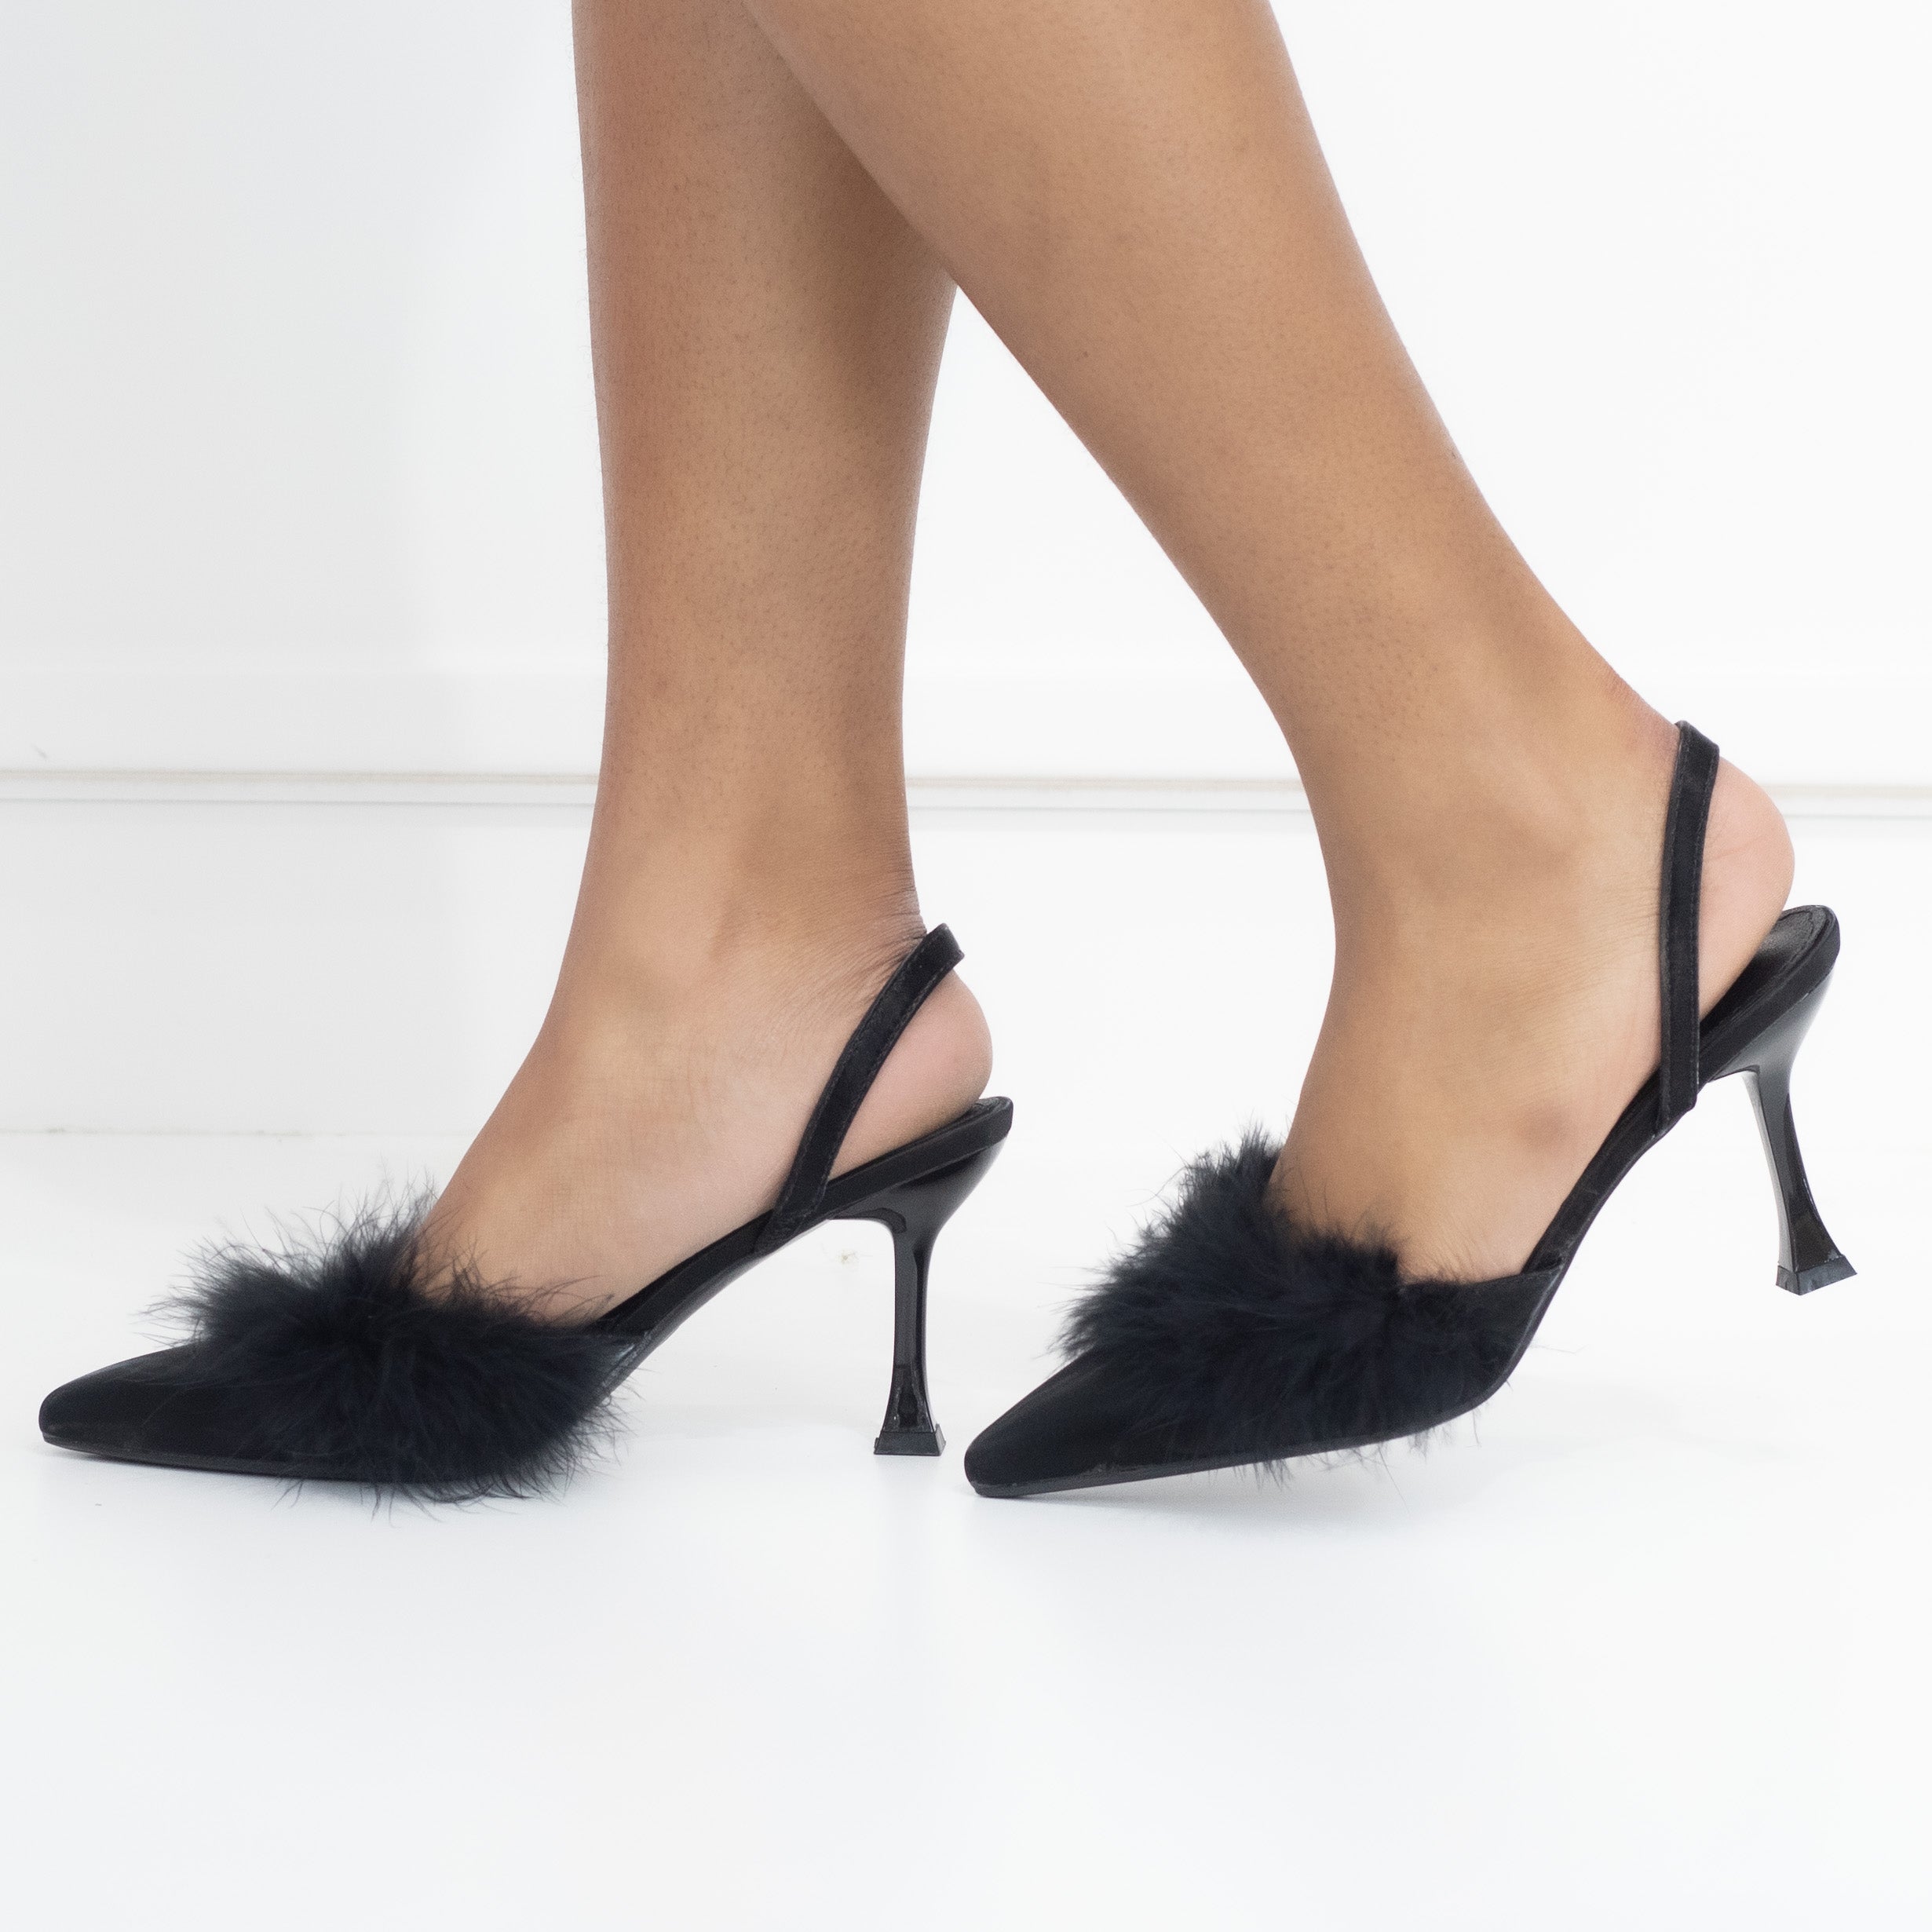 Black pointy sling back pump with fur detail nuray